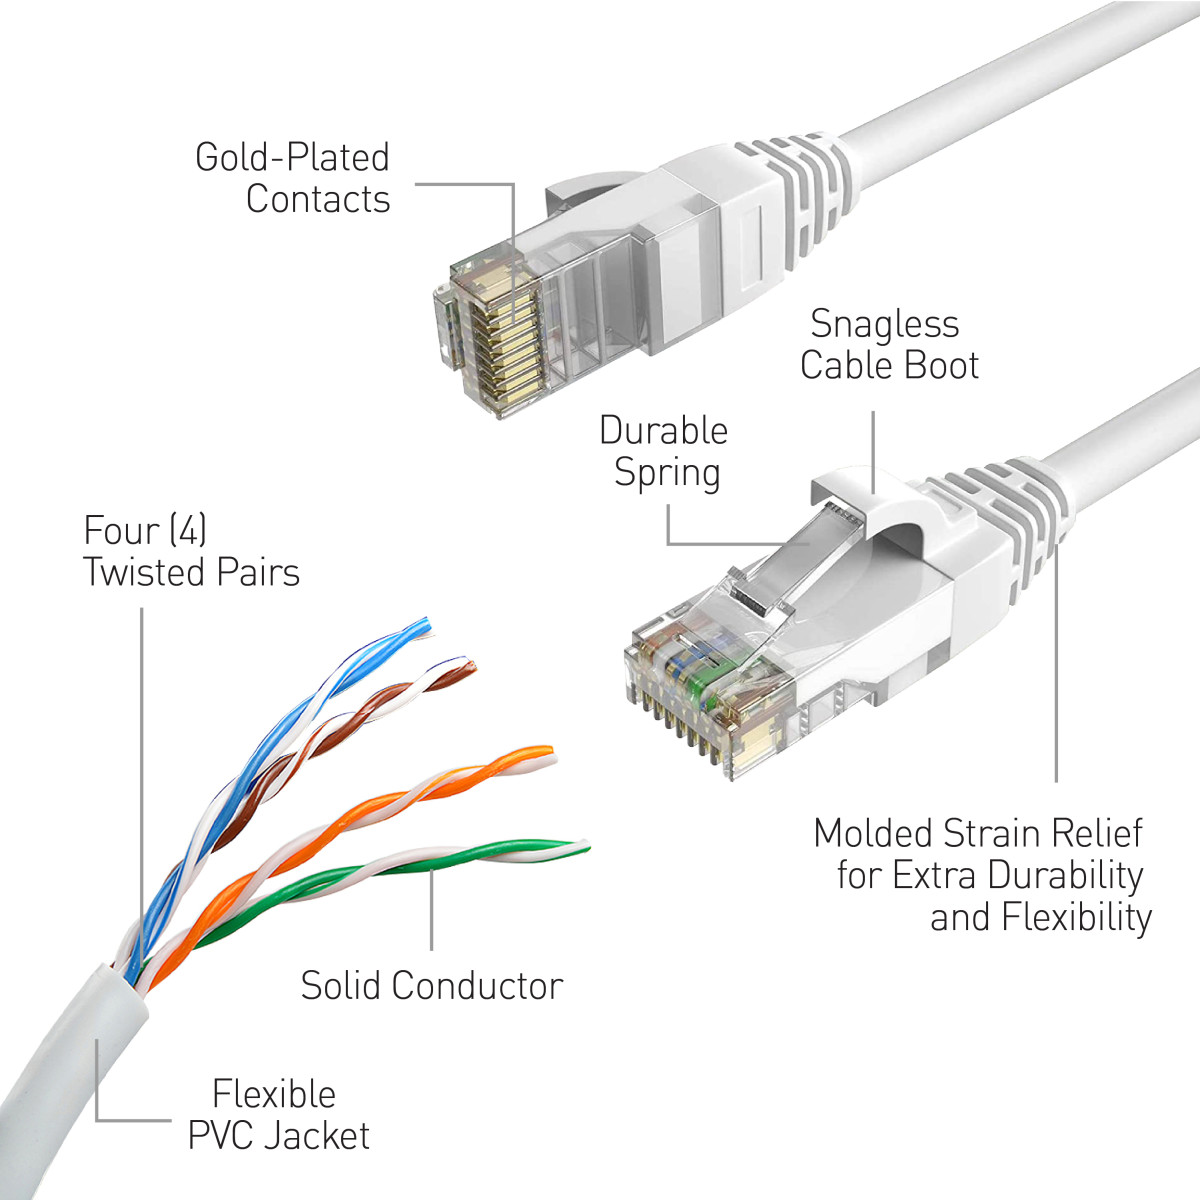 EUK - 200ft/60m Network Extension Cable